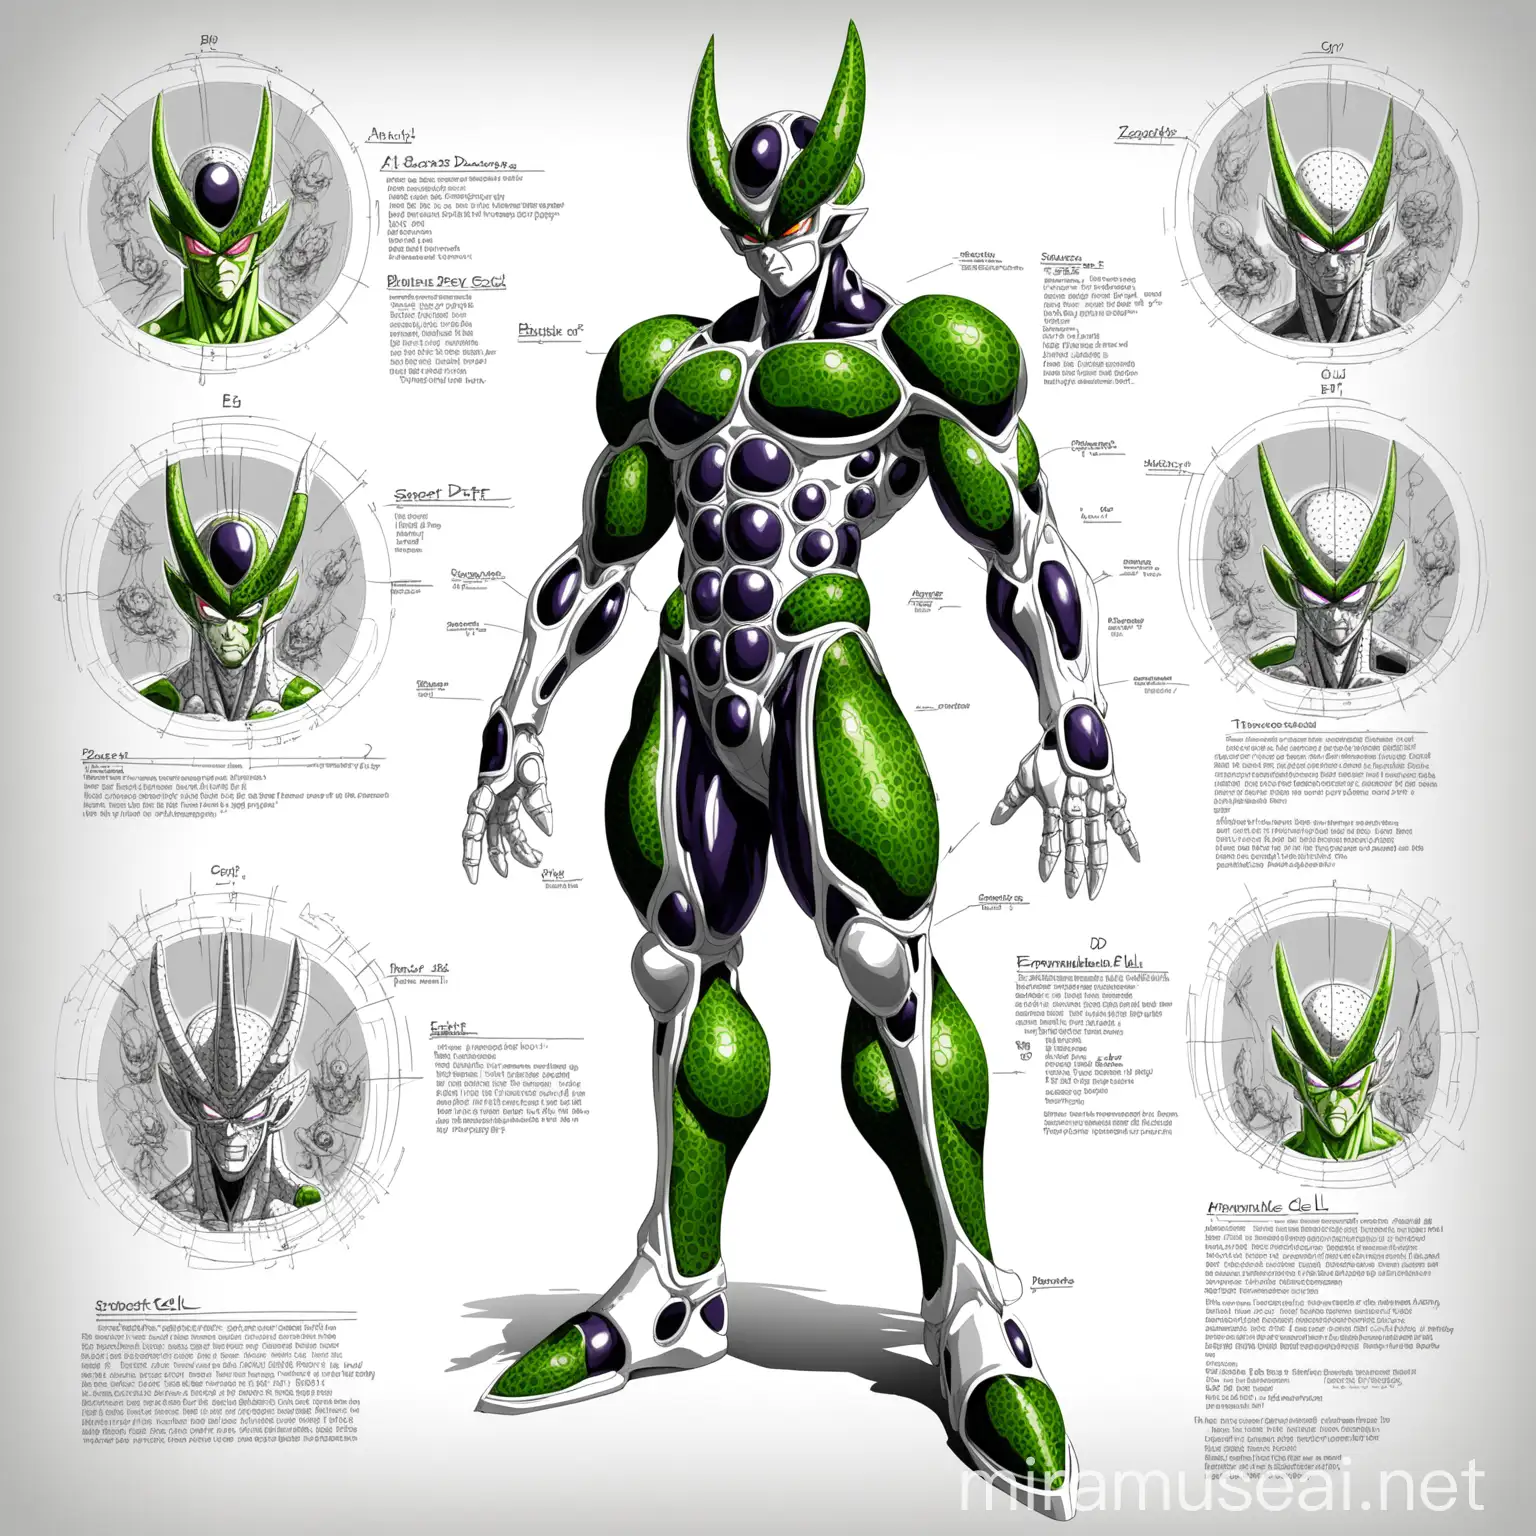 This character design draft depicts Perfect Cell, a formidable antagonist from the Dragon Ball manga series. The black and white line draft intricately showcases the complex structure of Perfect Cell's physique, including his sleek exoskeleton, sharp features, and biomechanical elements. The 3D display effect adds depth and realism to Perfect Cell's appearance, allowing viewers to appreciate the intricacies of his design from different angles. The design drawings provide detailed schematics of Perfect Cell's anatomy, highlighting key features and proportions with precision. Against a white background, Perfect Cell stands out prominently, exuding an aura of power and menace. Annotations accompany the draft, indicating specific measurements and details to ensure accuracy in the portrayal  